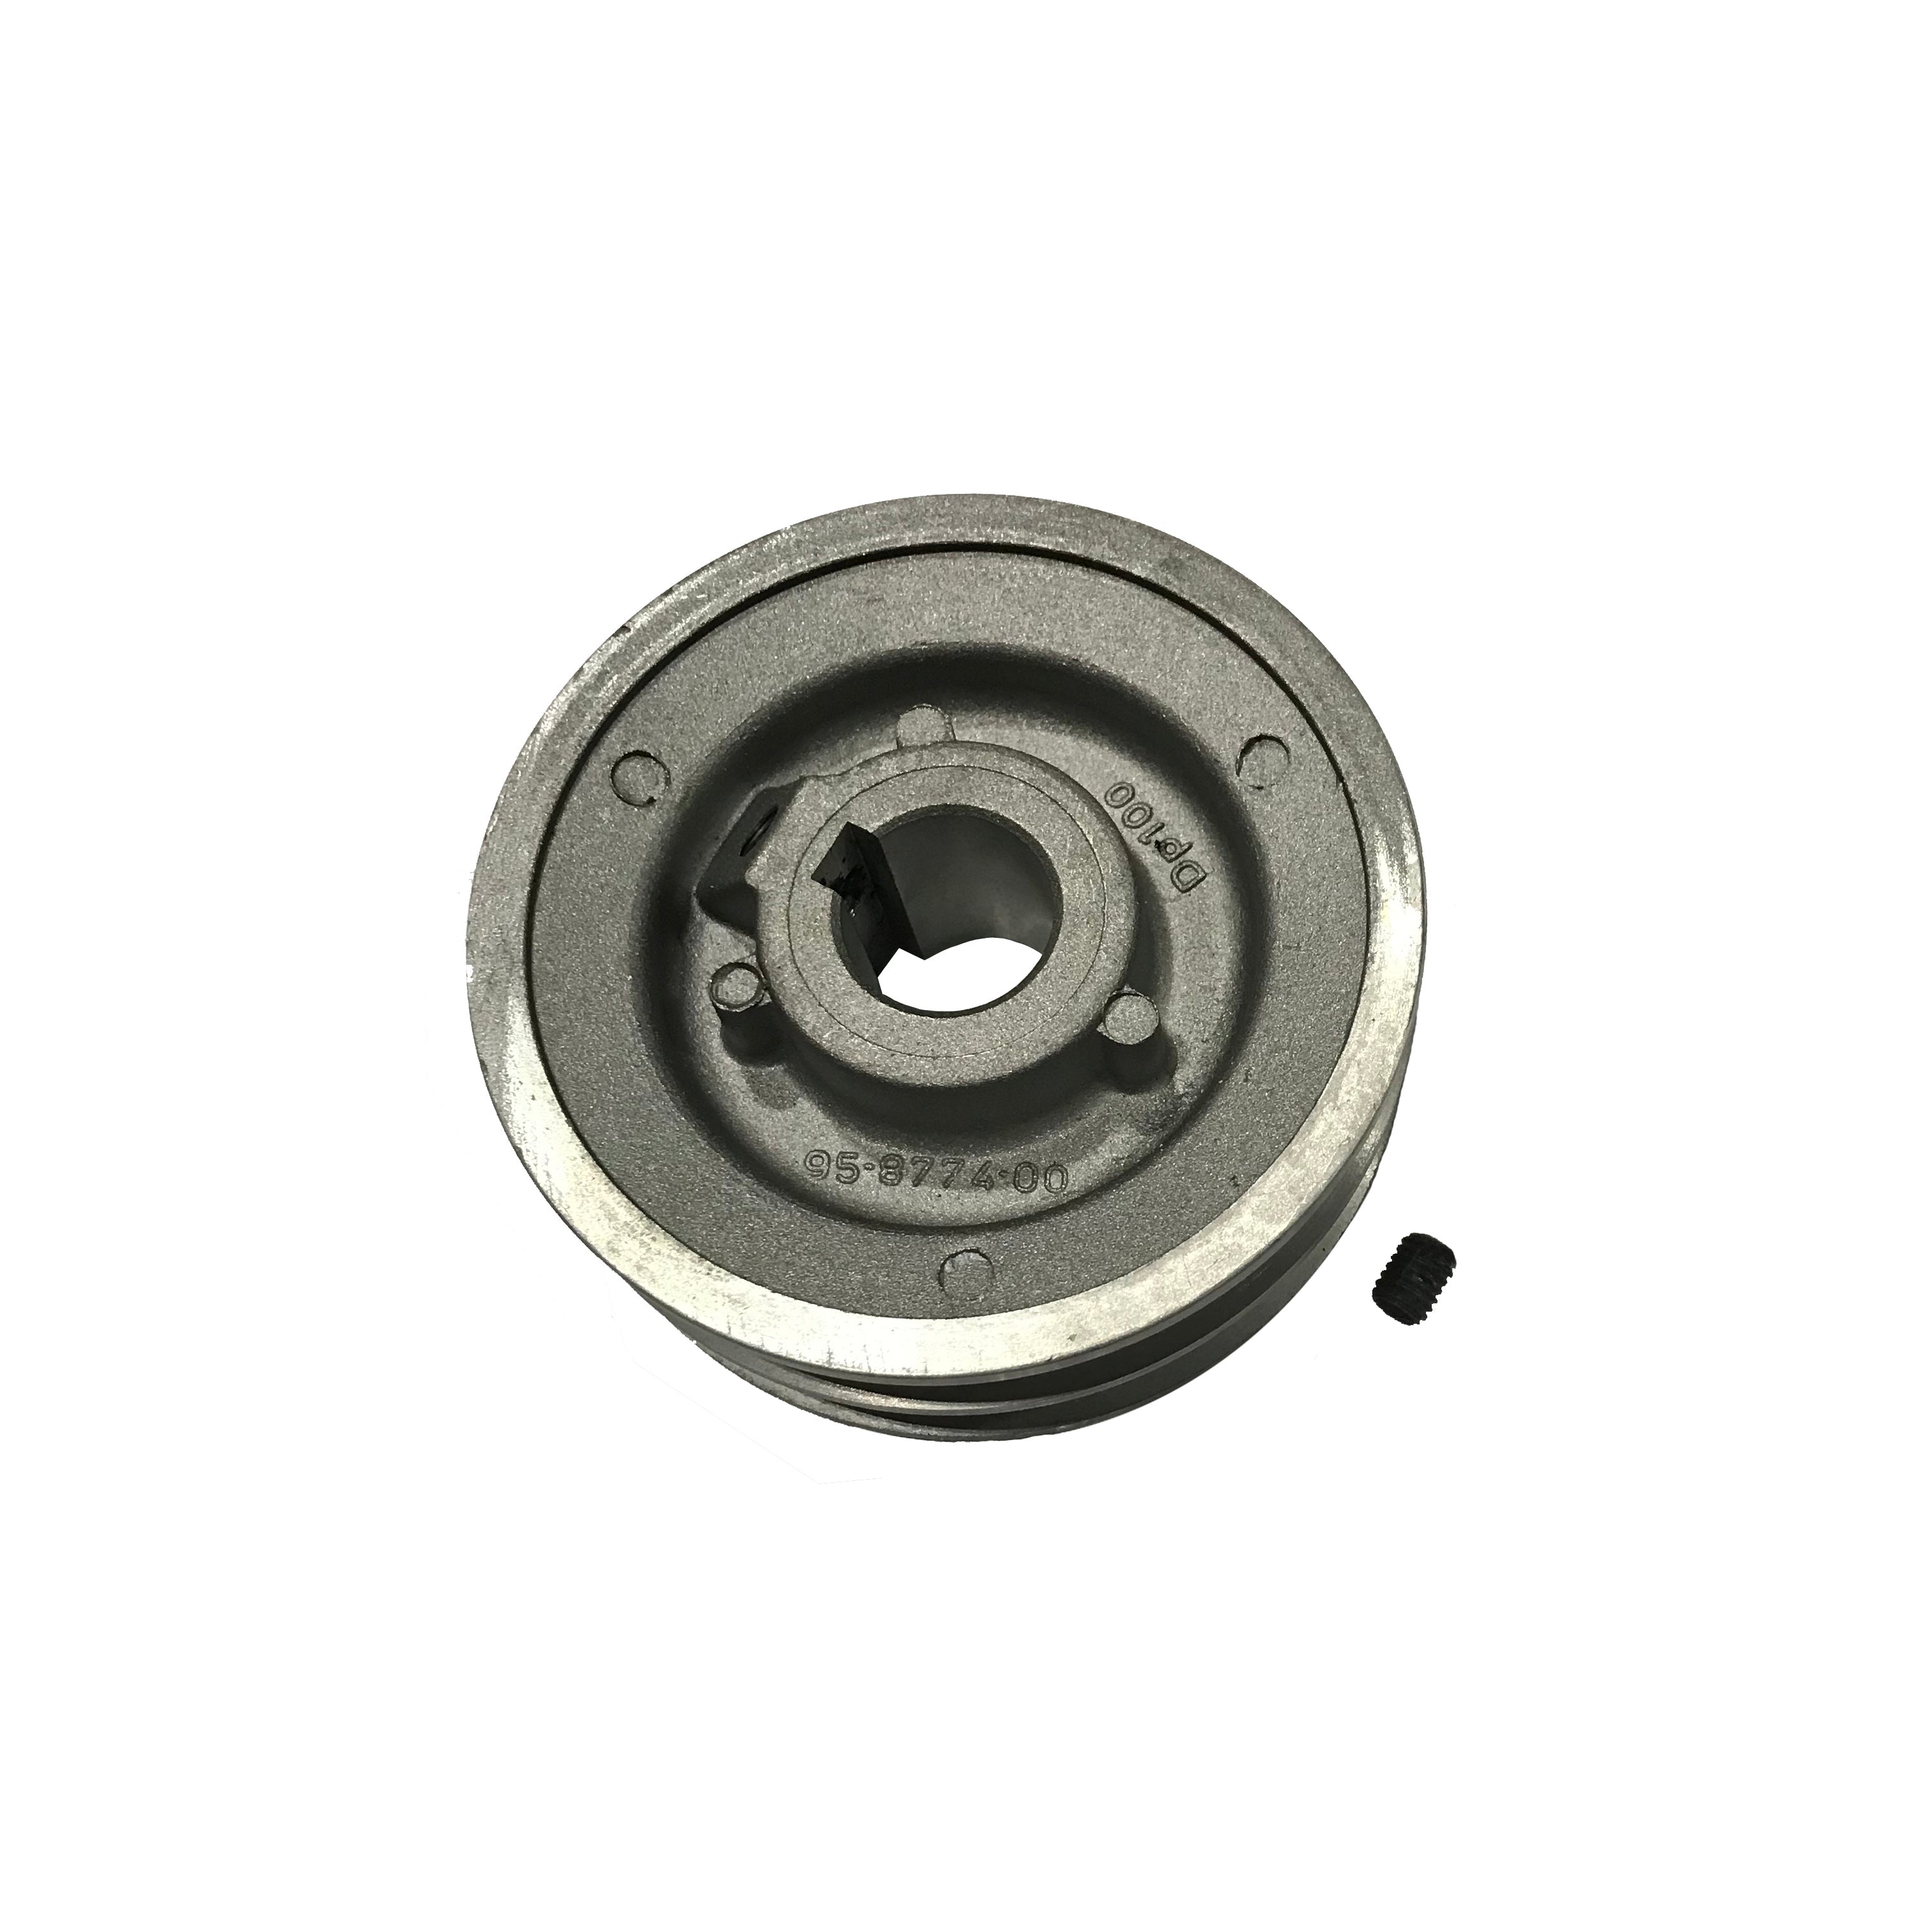 Karcher 8.711-115.0 Pulley, 4" (100mm), 24mm Bore